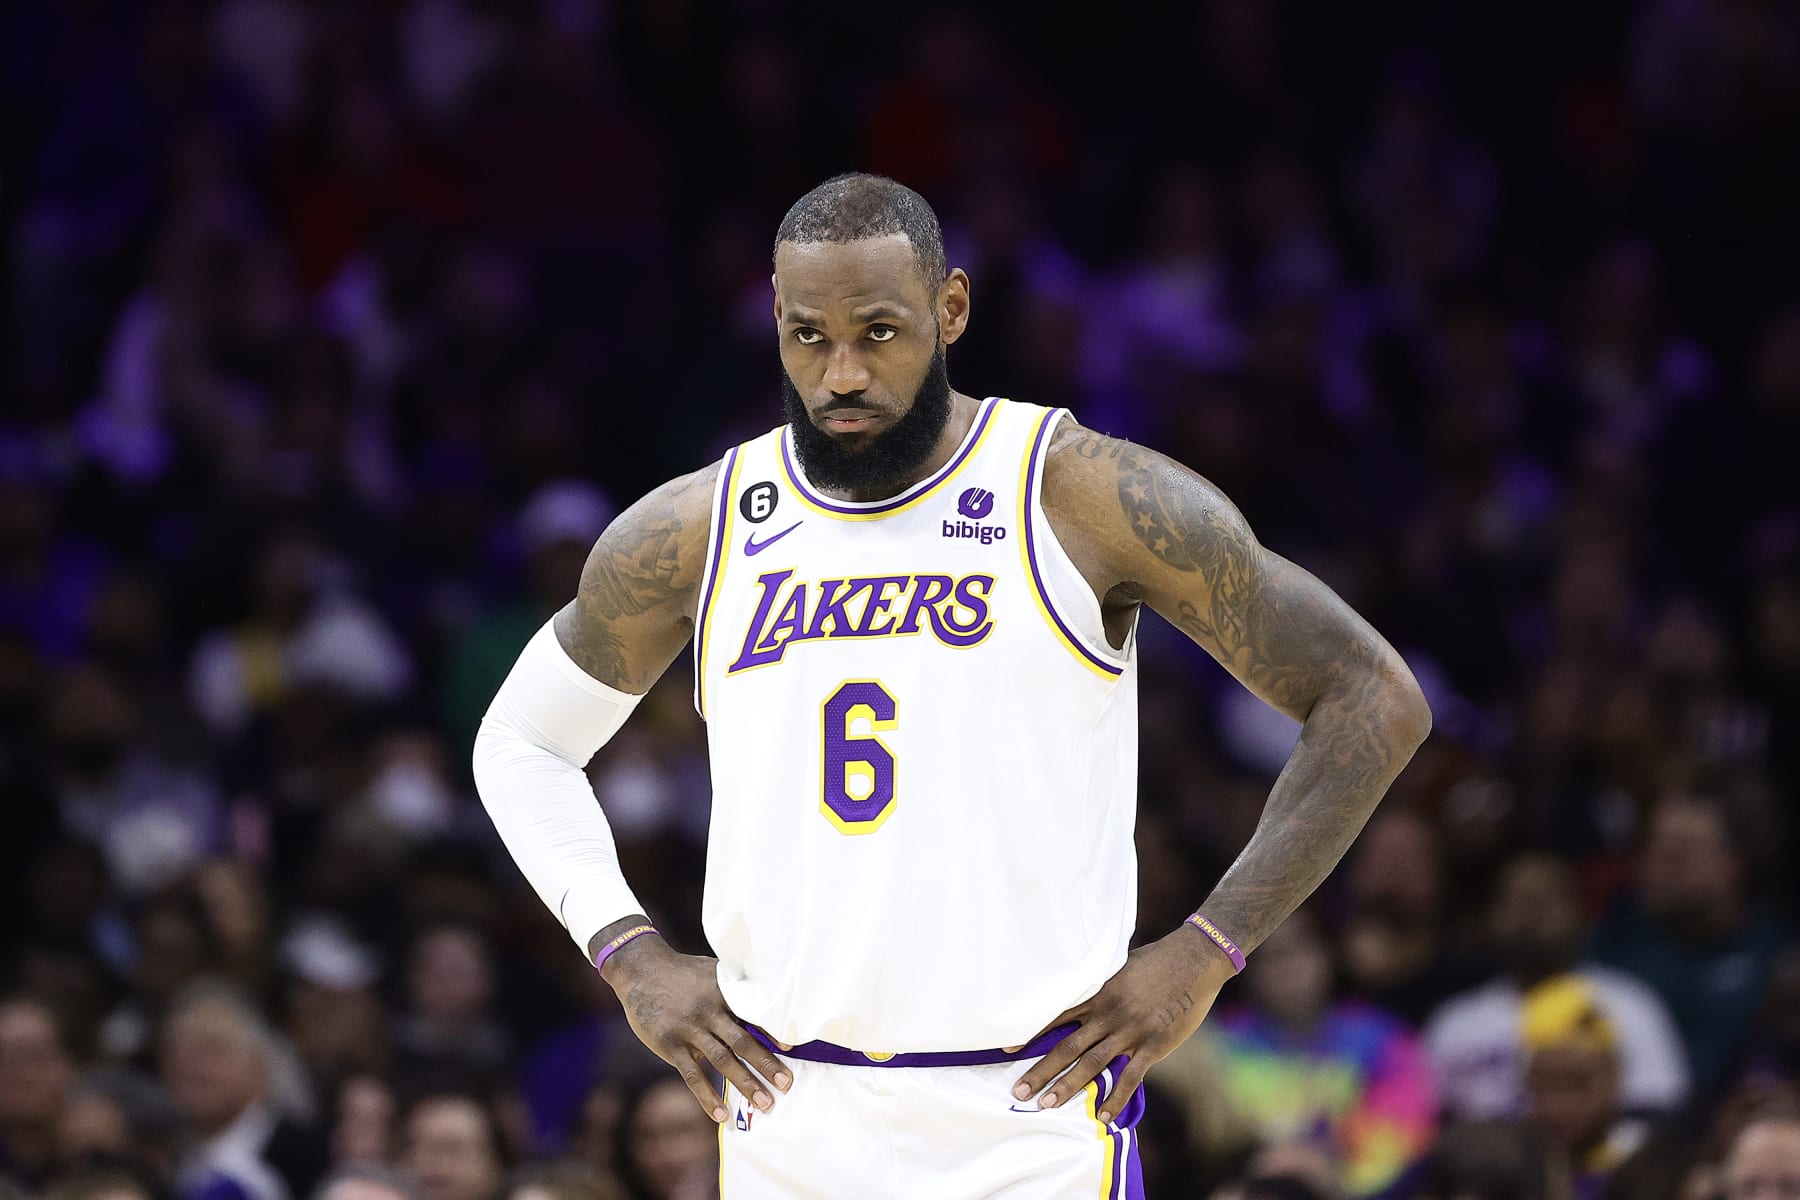 Lakers vs Raptors Picks and Predictions: Scoring Slows With AD and LeBron  Absent